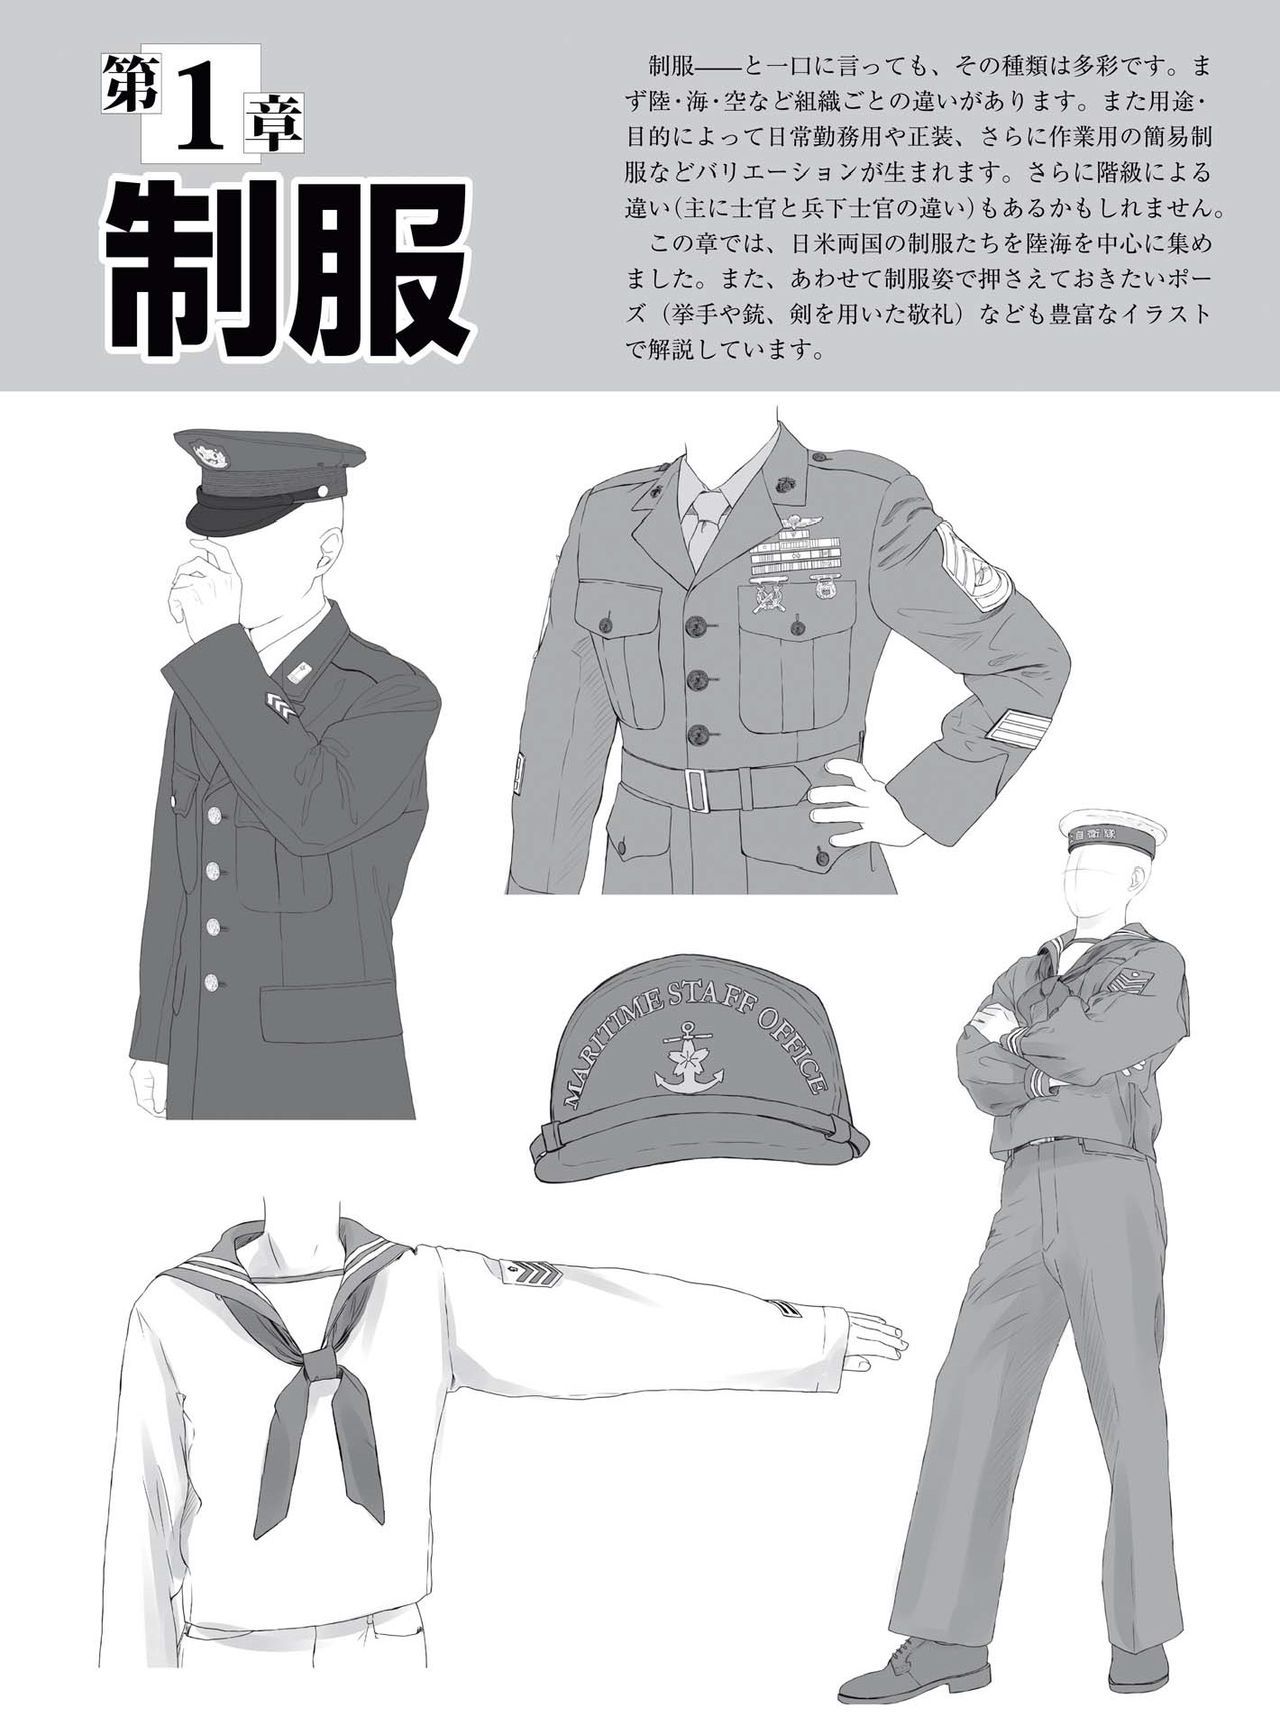 How to draw military uniforms and uniforms From Self-Defense Forces 軍服・制服の描き方 アメリカ軍・自衛隊の制服から戦闘服まで 40